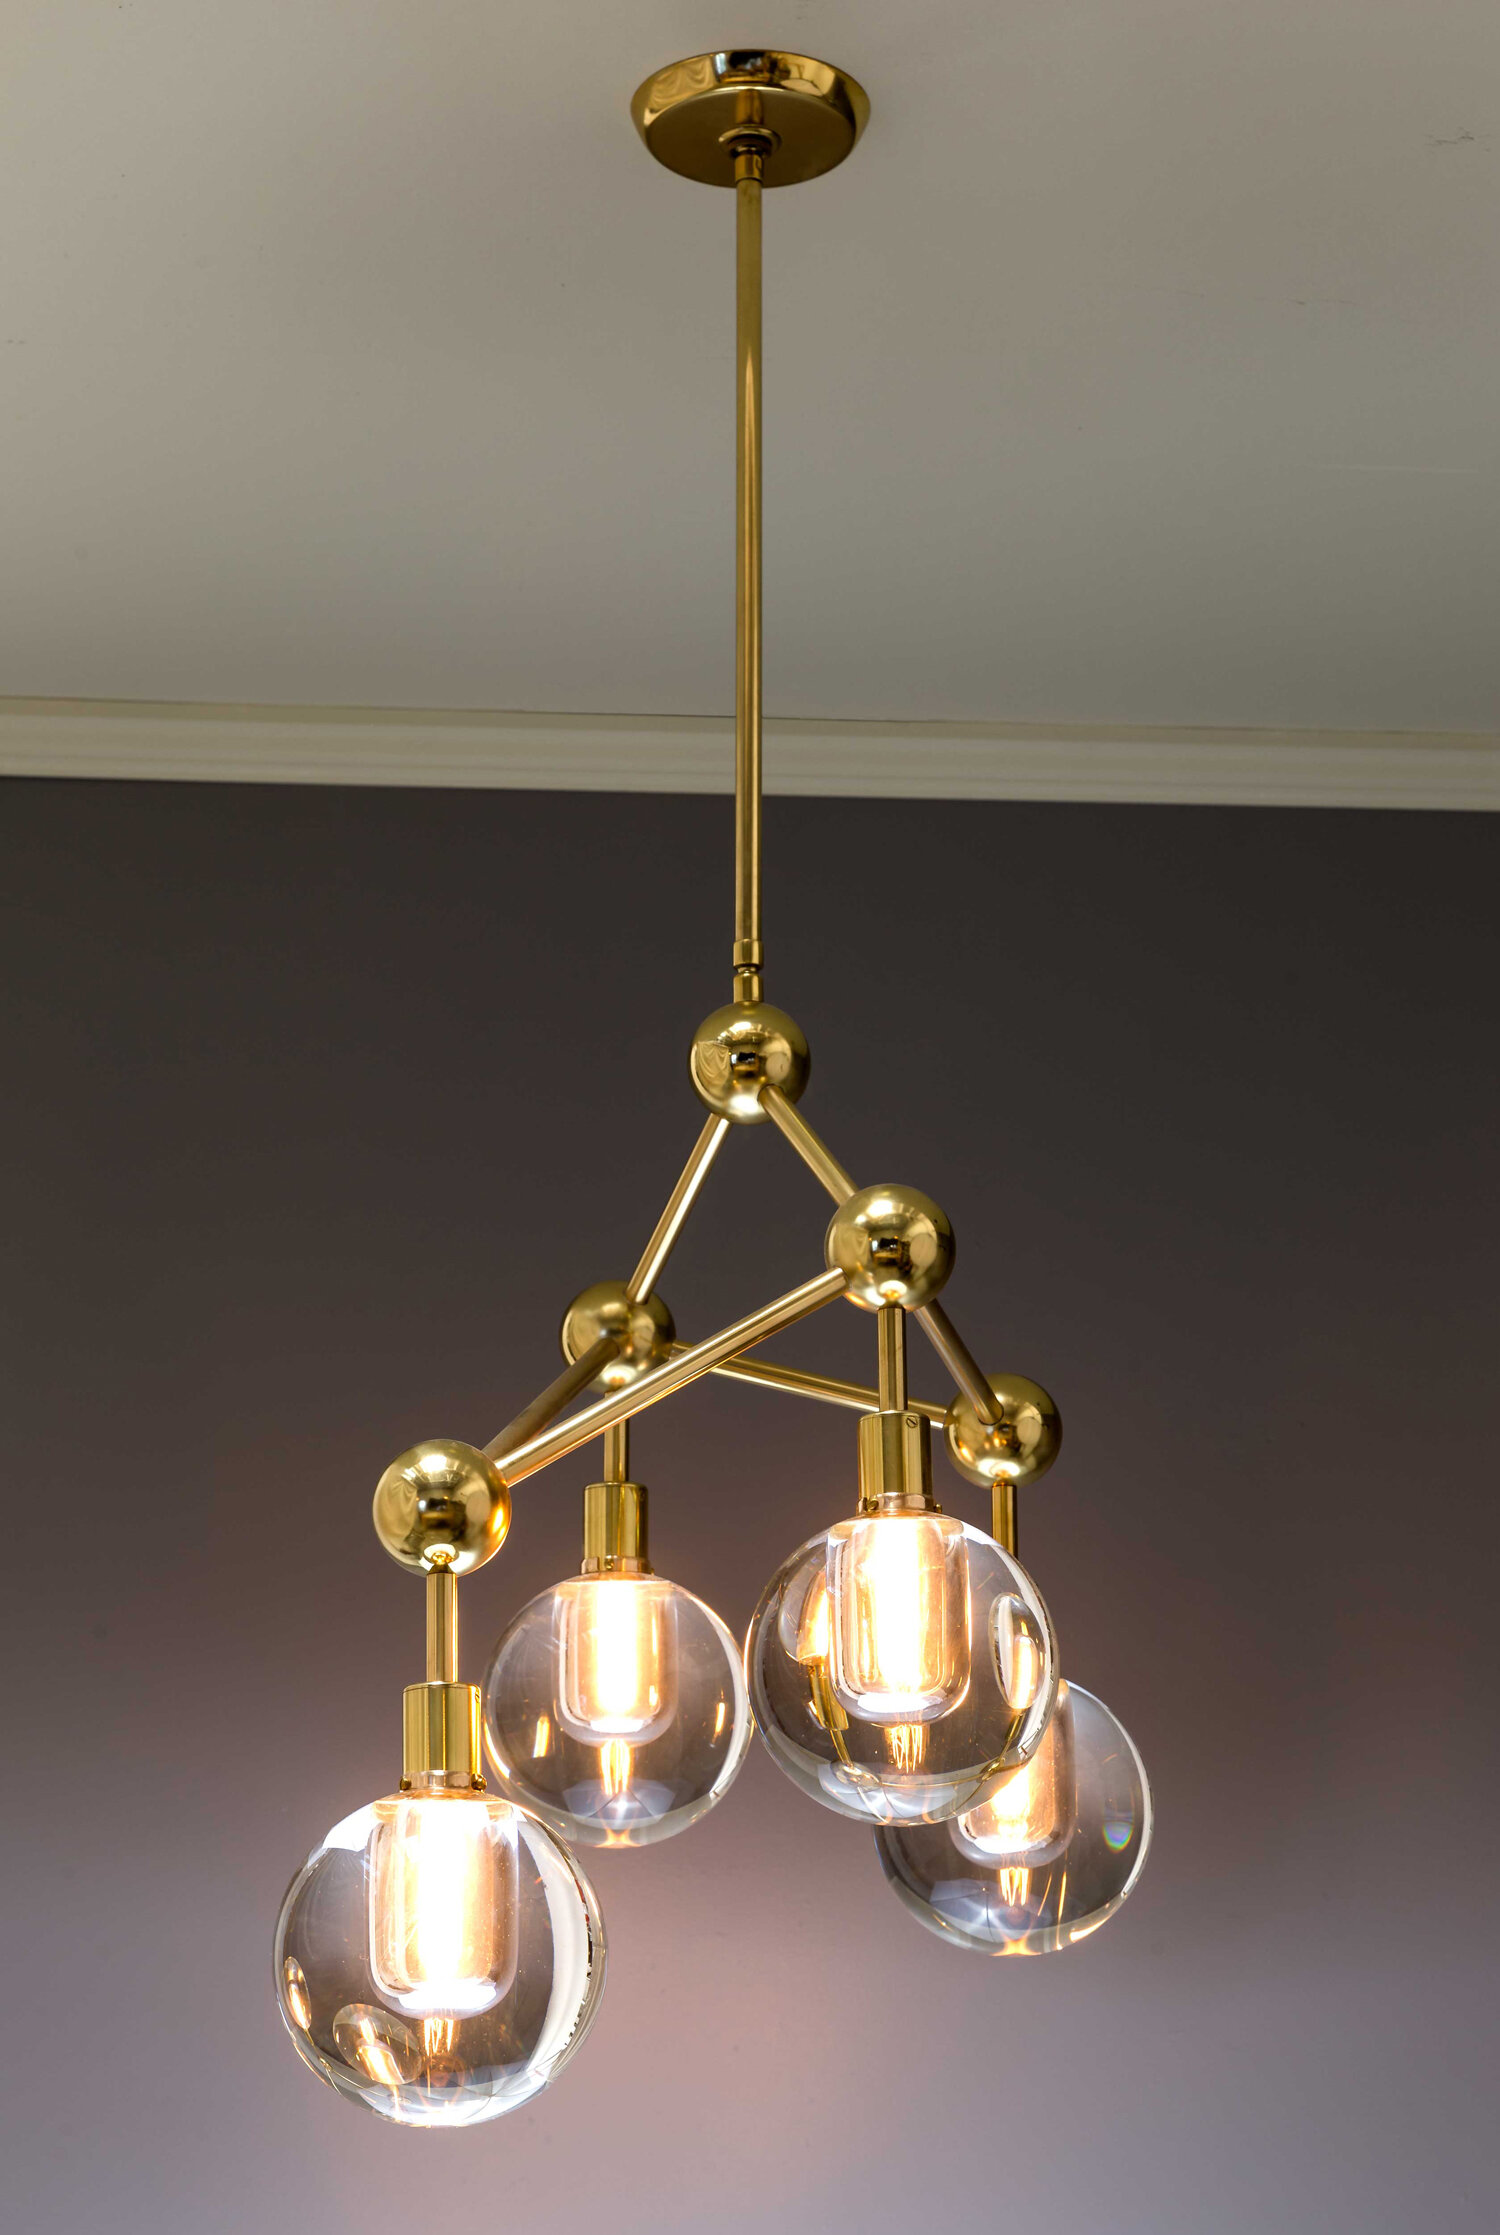 Brass and glass chandelier.